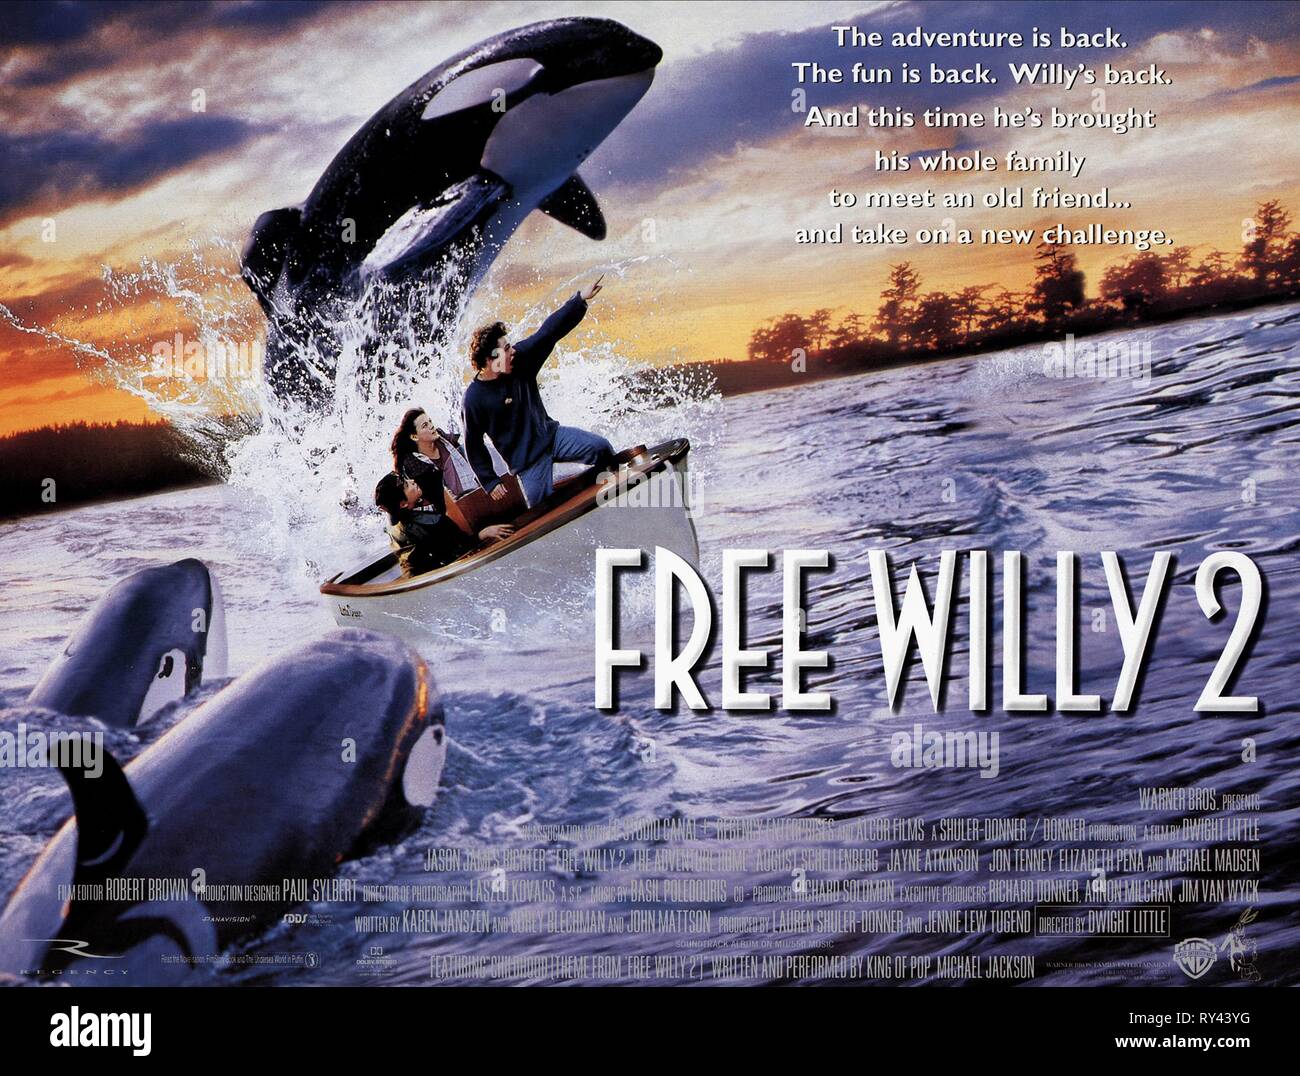 free willy 2 full movie download